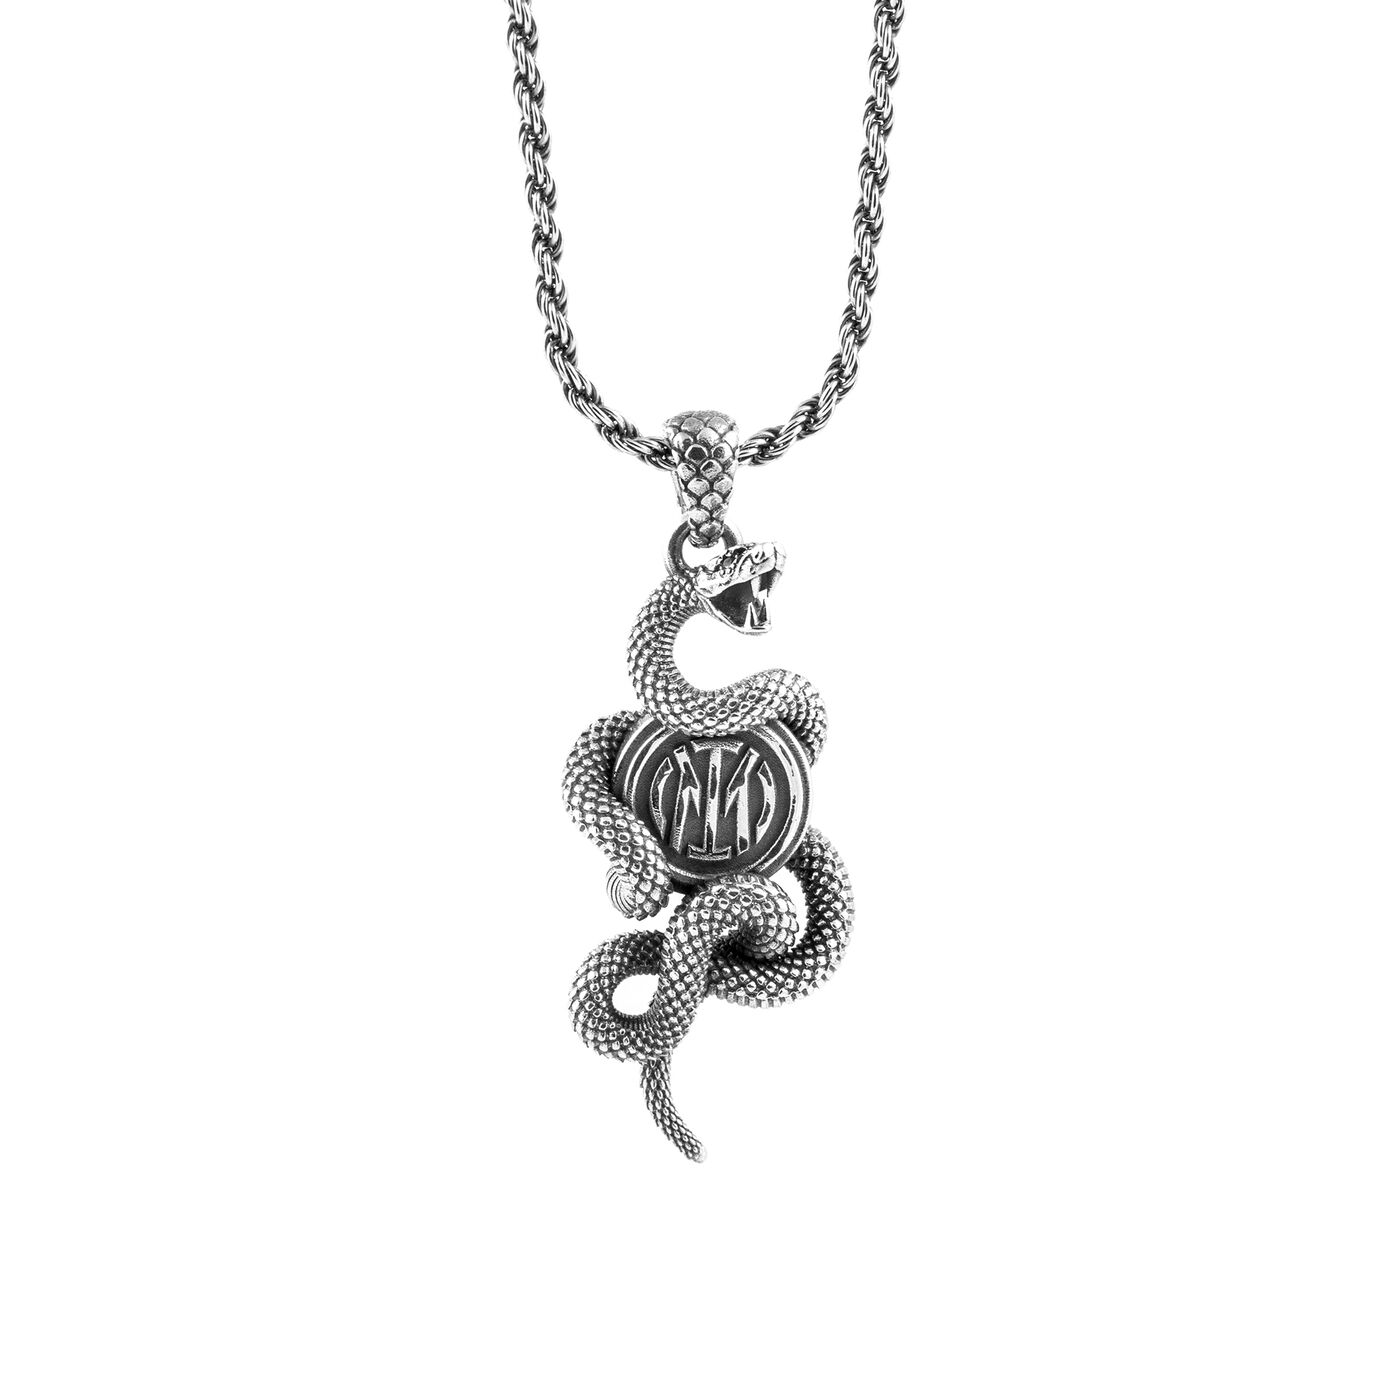 Image IM NOVE25 NECKLACE WITH SNAKE PENDANT